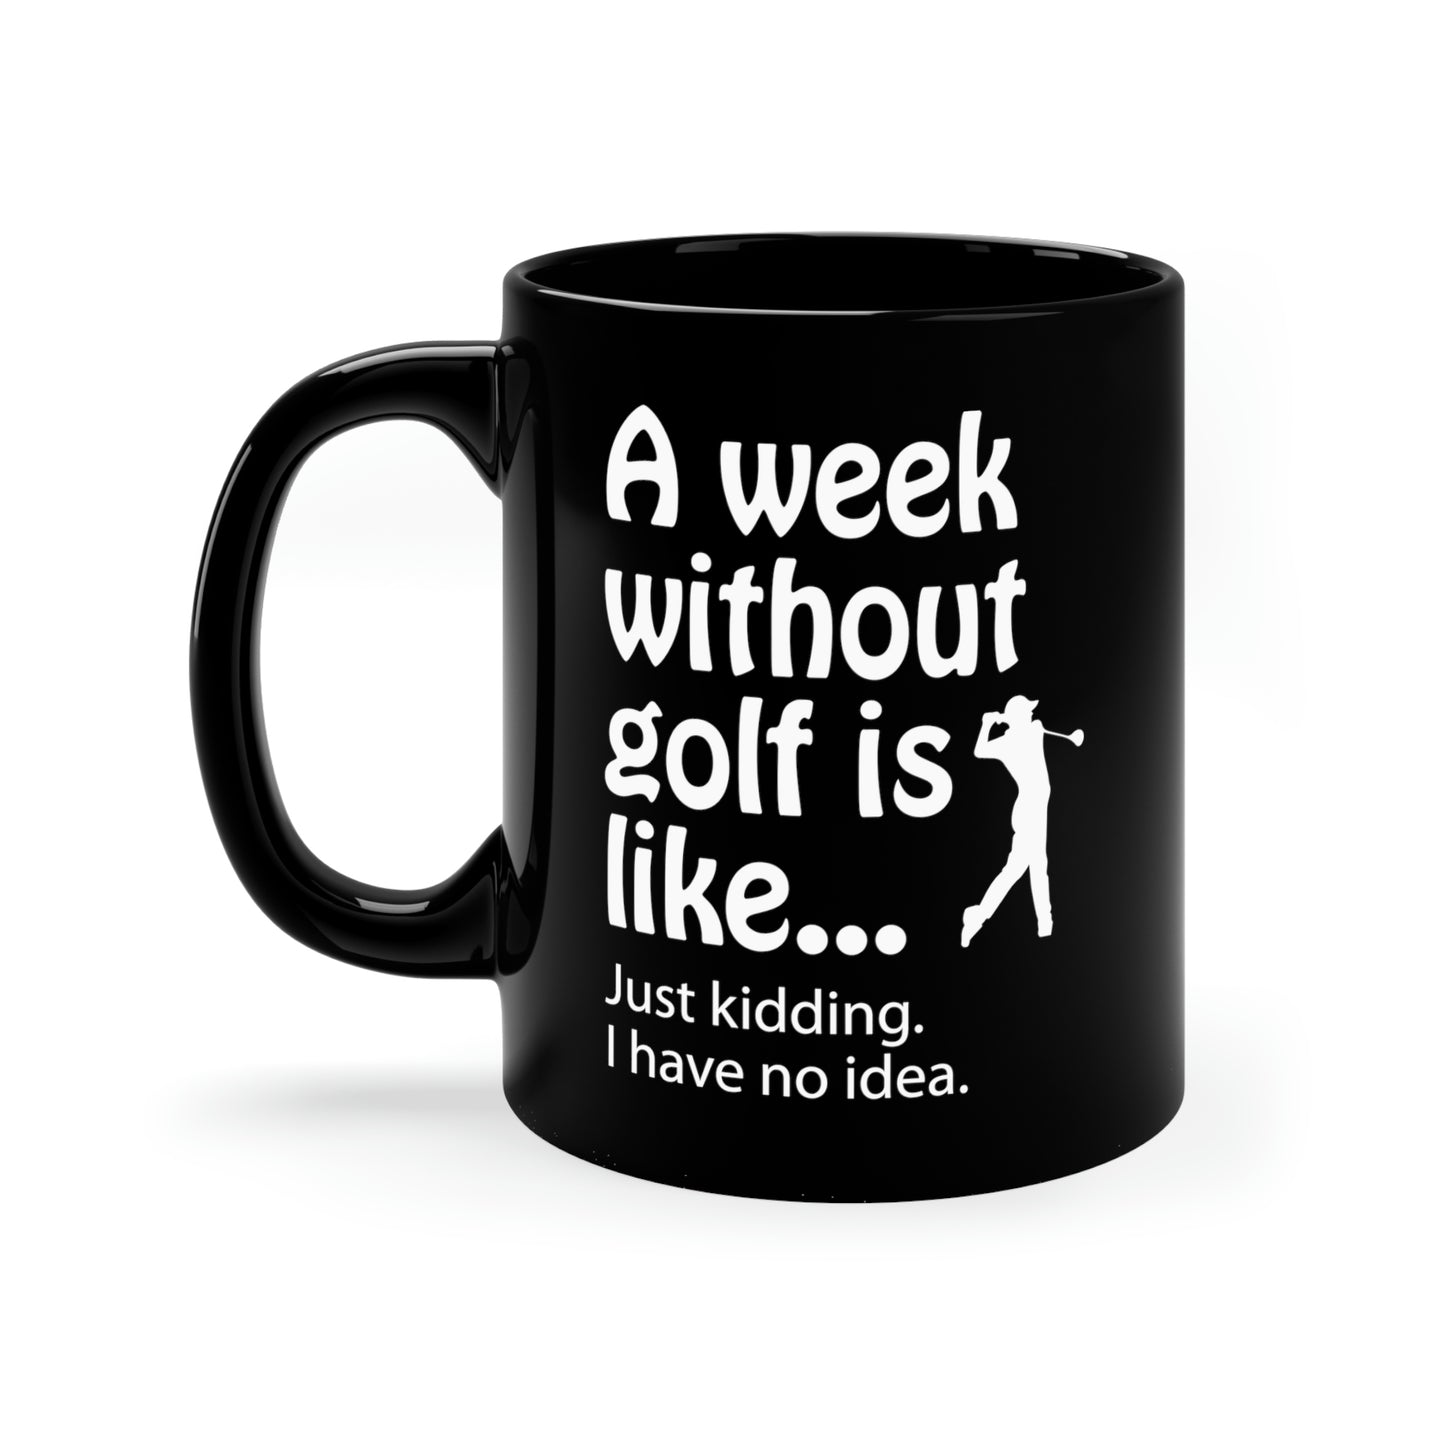 What does a week without golf feel like? (I don't wanna know) Black ceramic mug